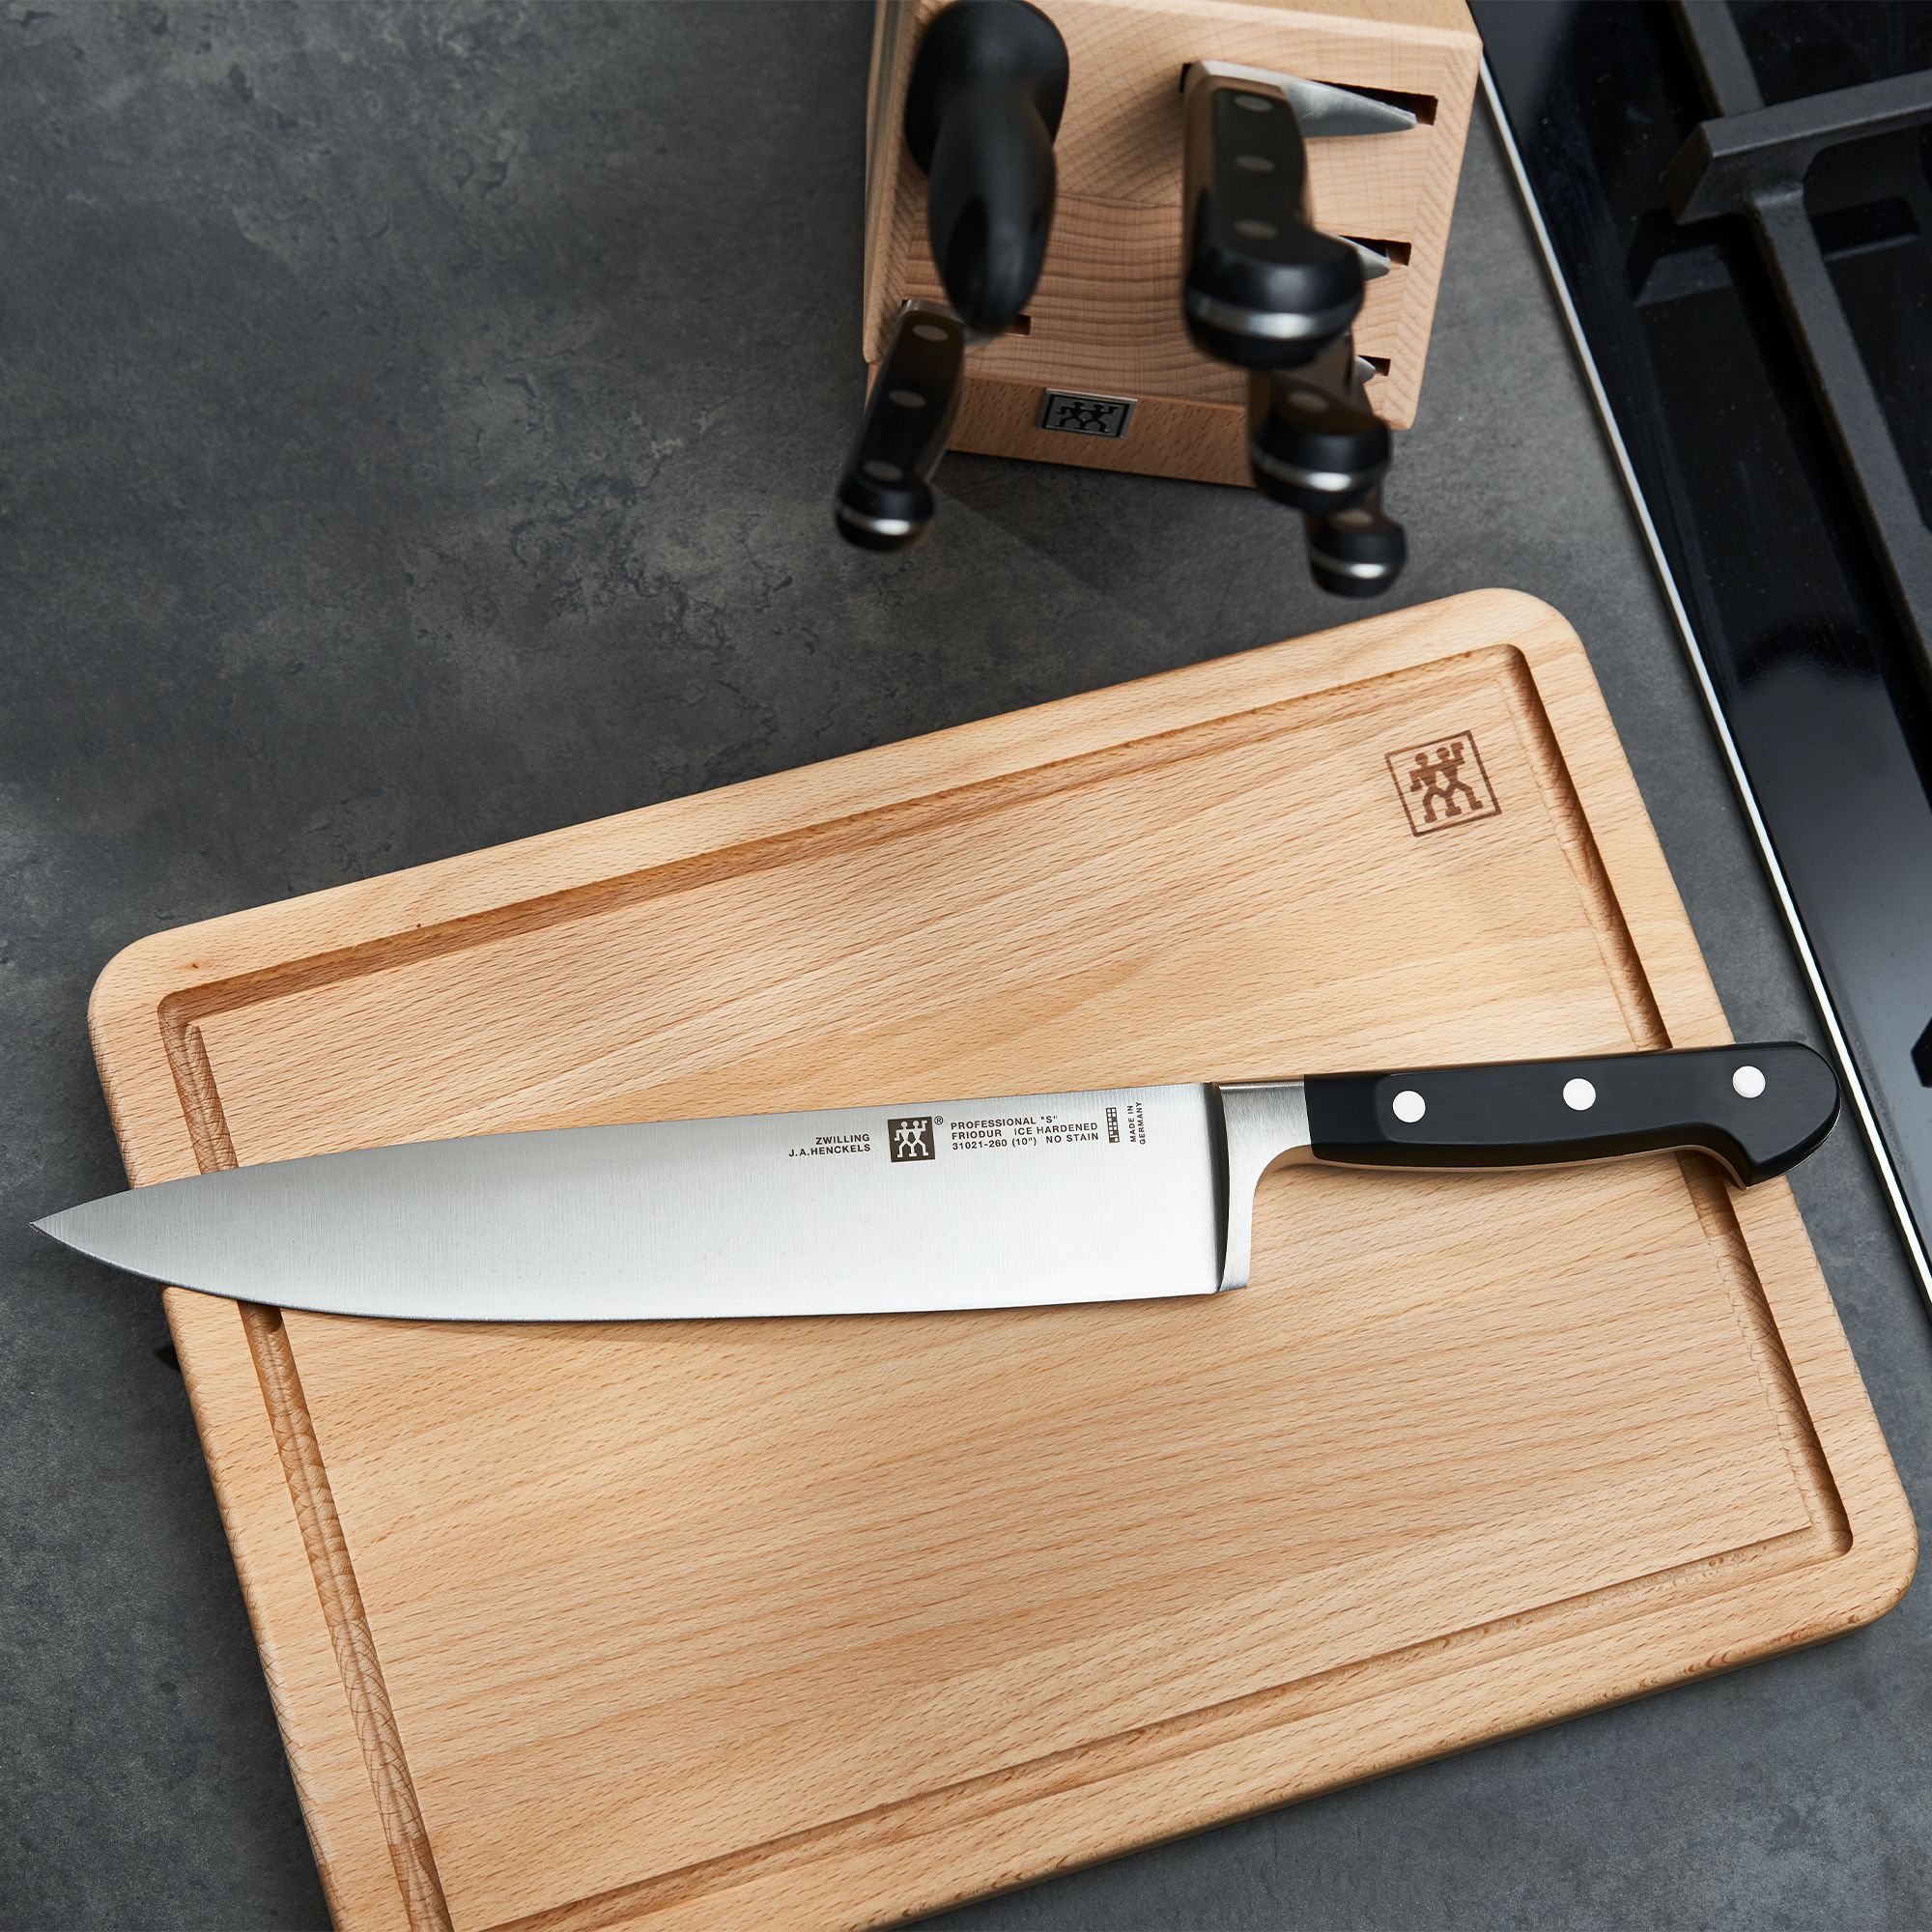 Zwilling - Professional S - Carving knife  - 26 cm